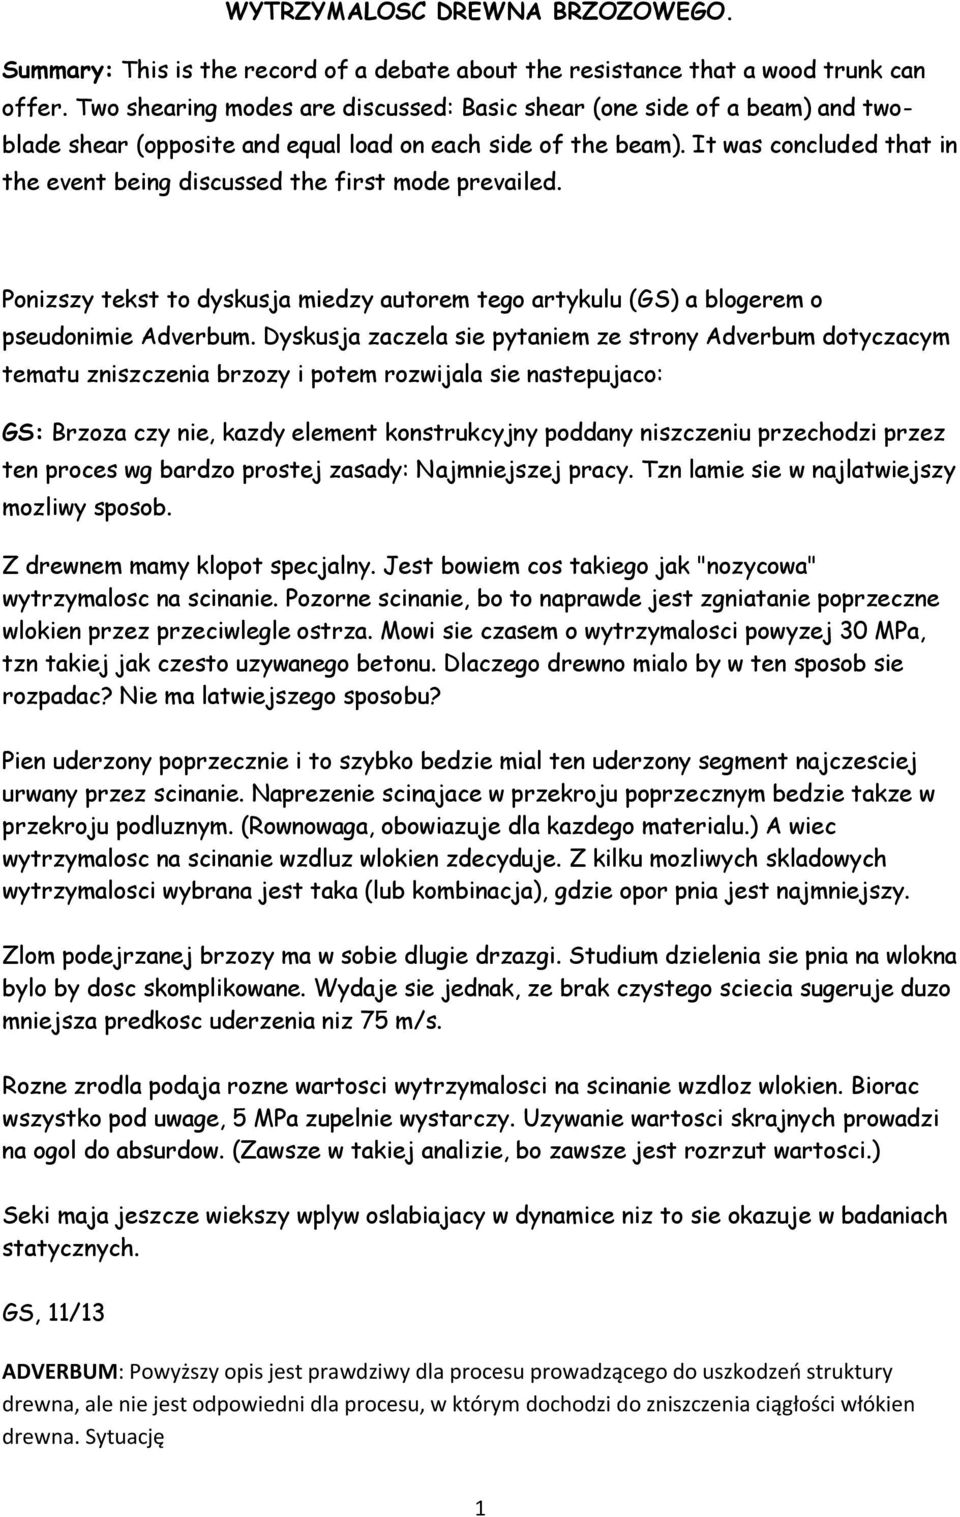 It was concluded that in the event being discussed the first mode prevailed. Ponizszy tekst to dyskusja miedzy autorem tego artykulu (GS) a blogerem o pseudonimie Adverbum.